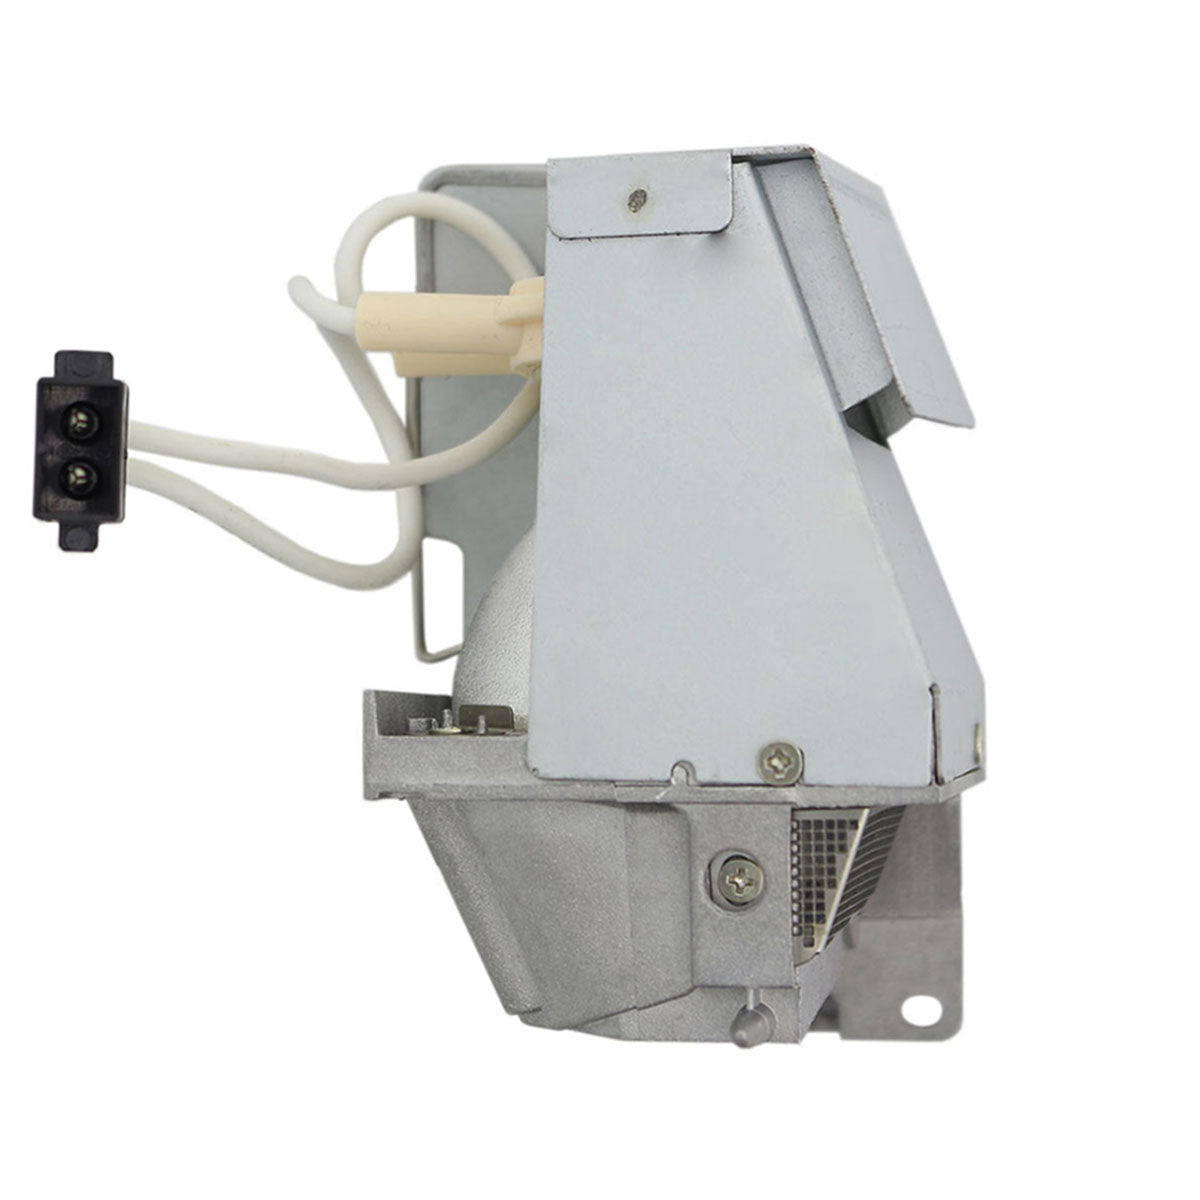 Acer MR.JHG11.002 Compatible Projector Lamp Module